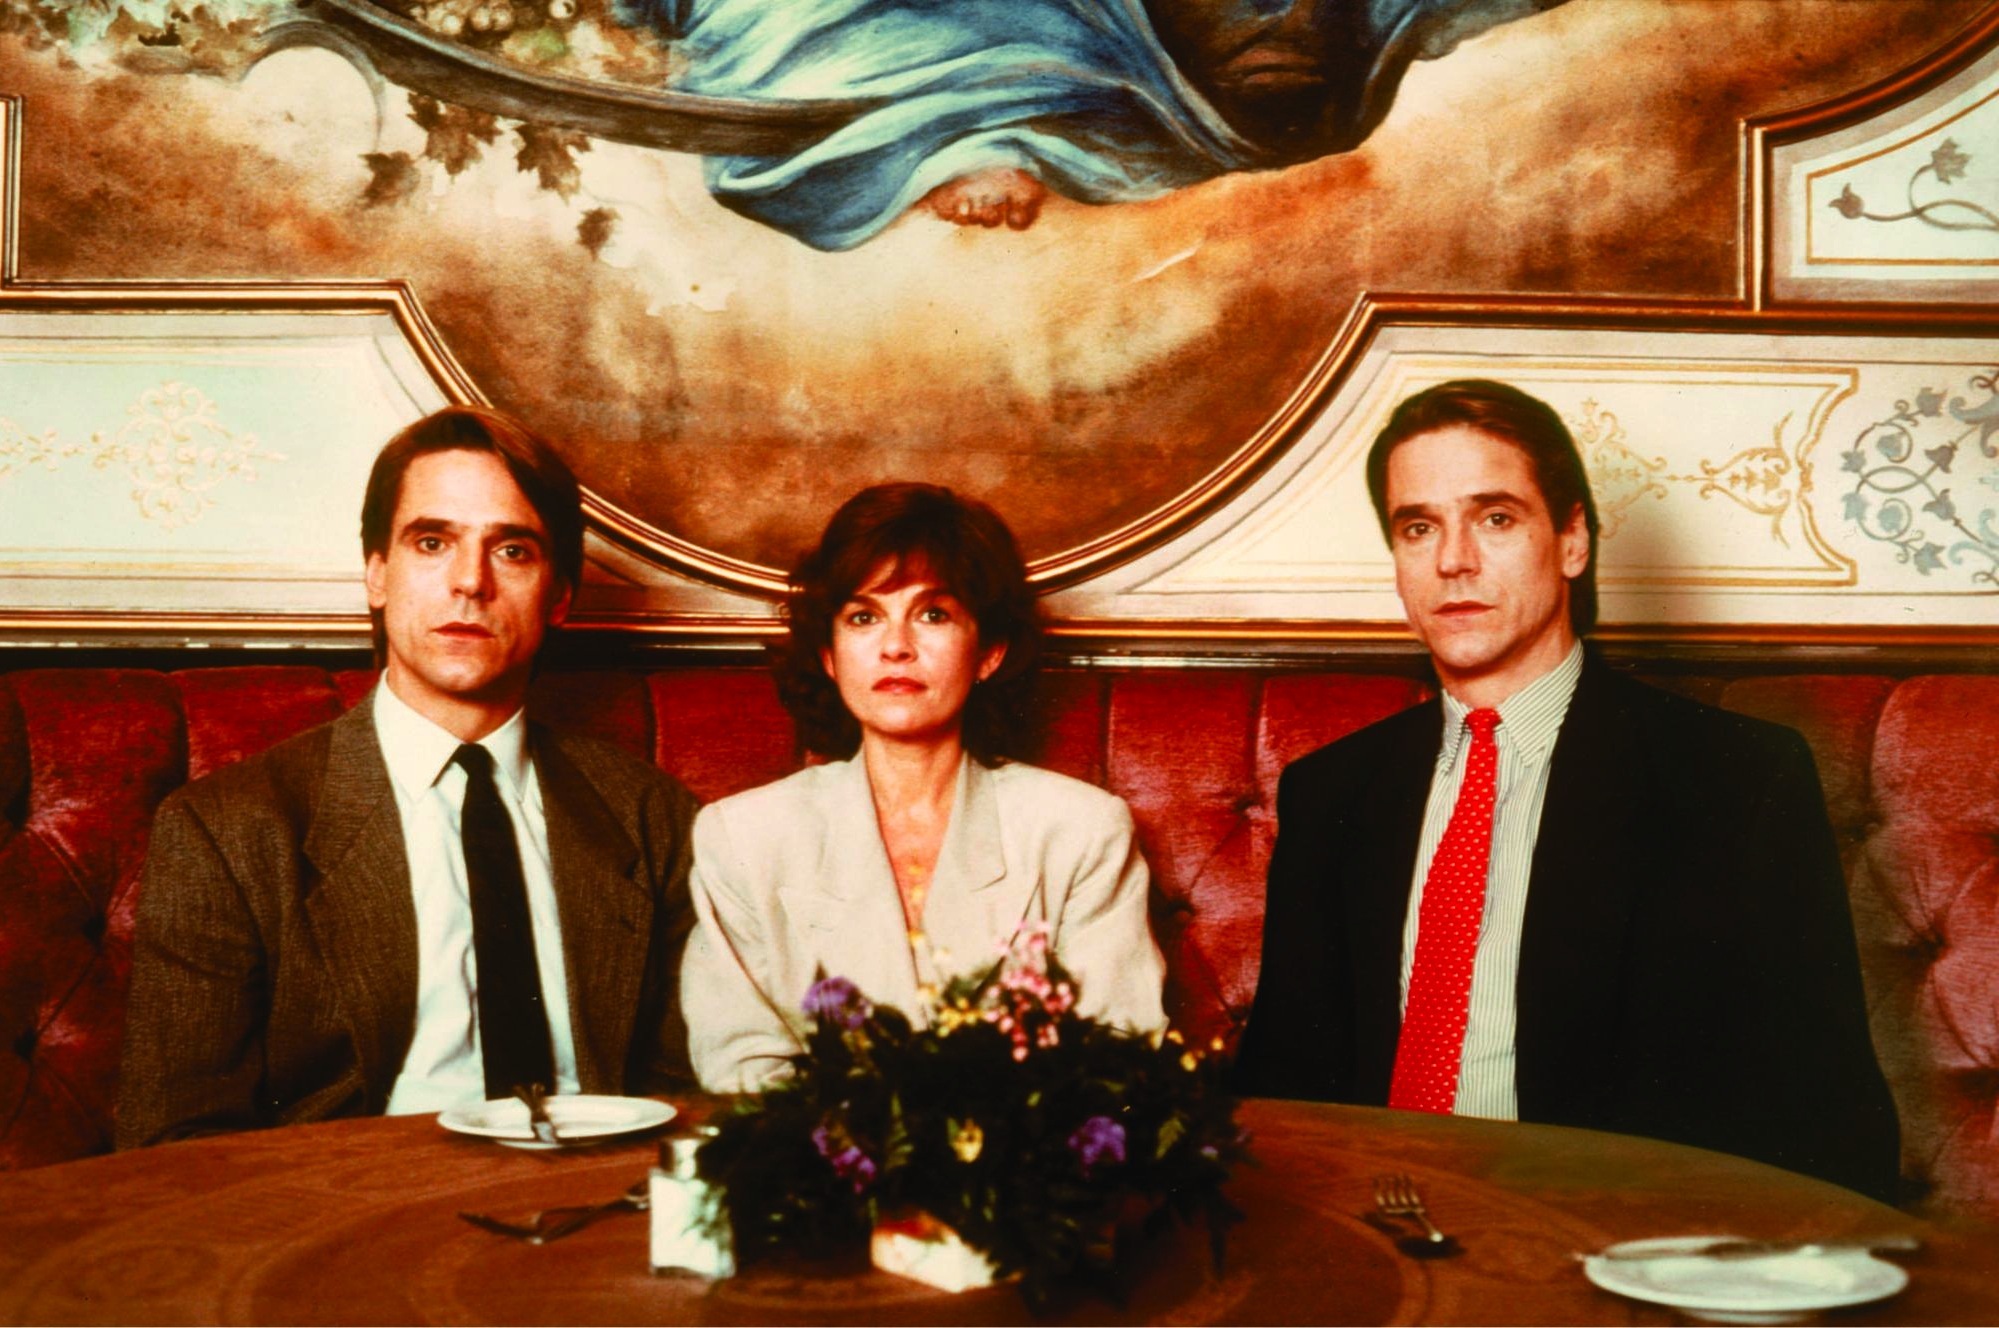 Still of Jeremy Irons and Geneviève Bujold in Dead Ringers (1988)